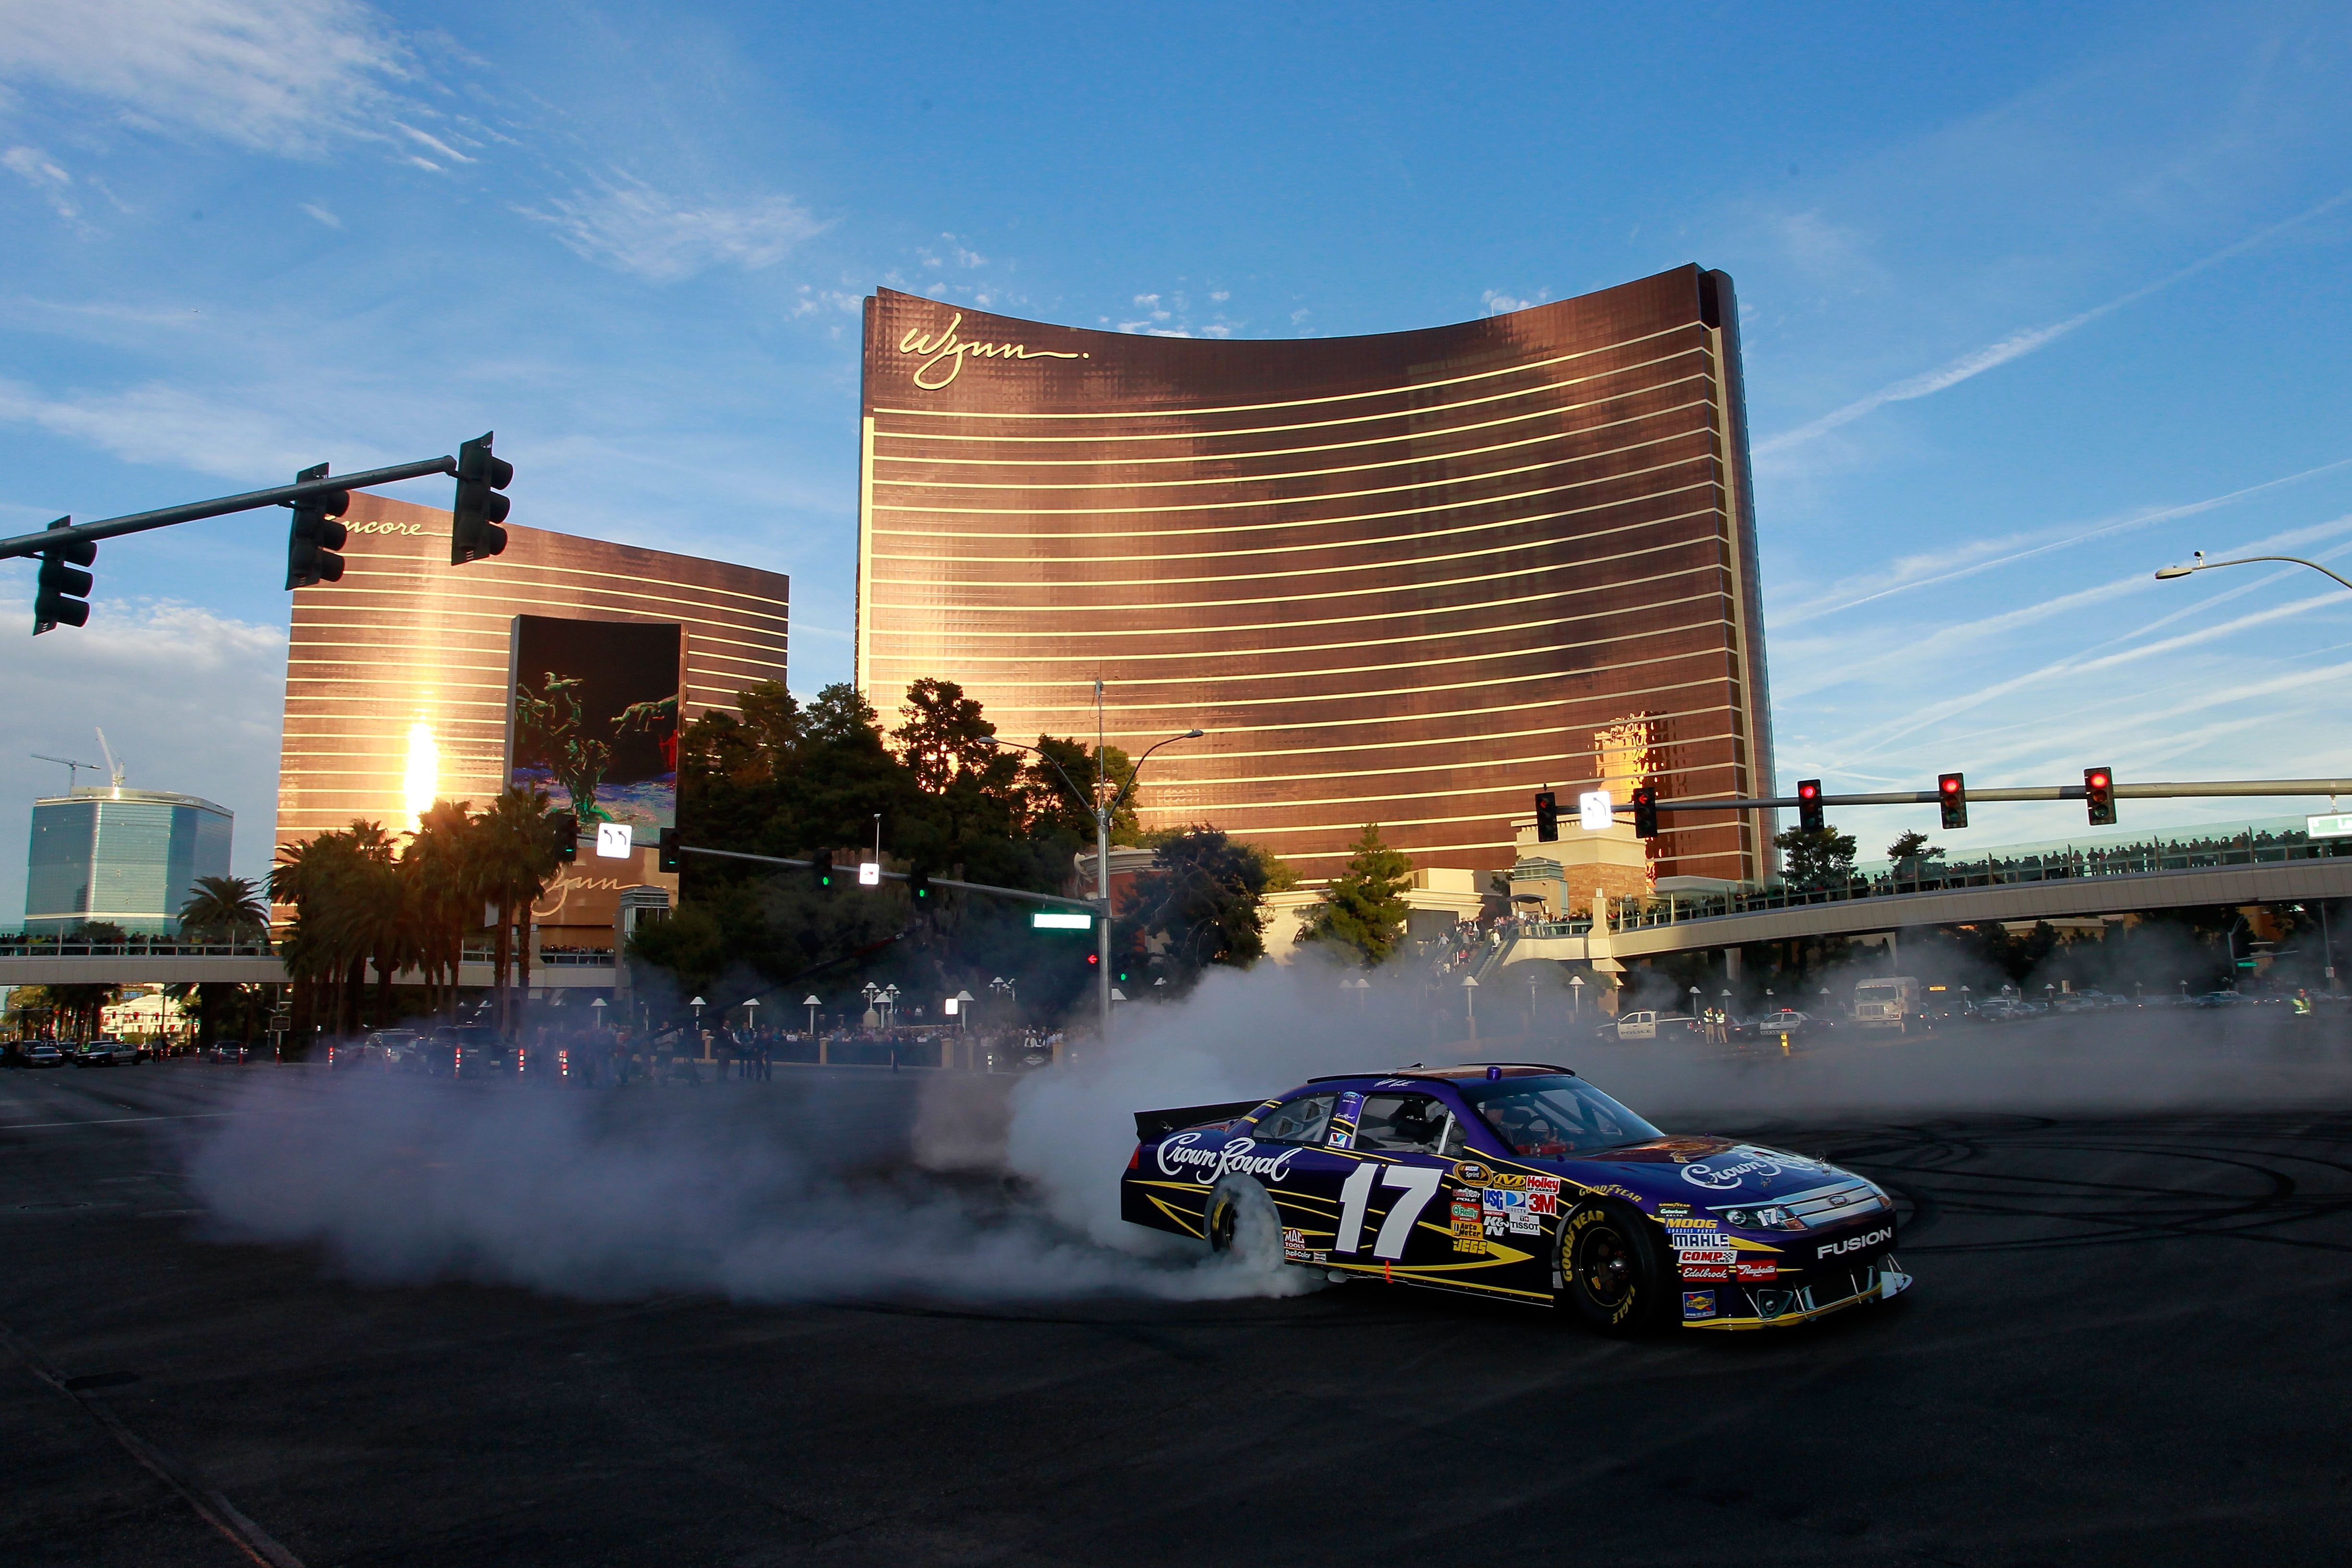 Matt Kenseth may make it back to Las Vegas but a NASCAR SPrint Cup title may be asking much.